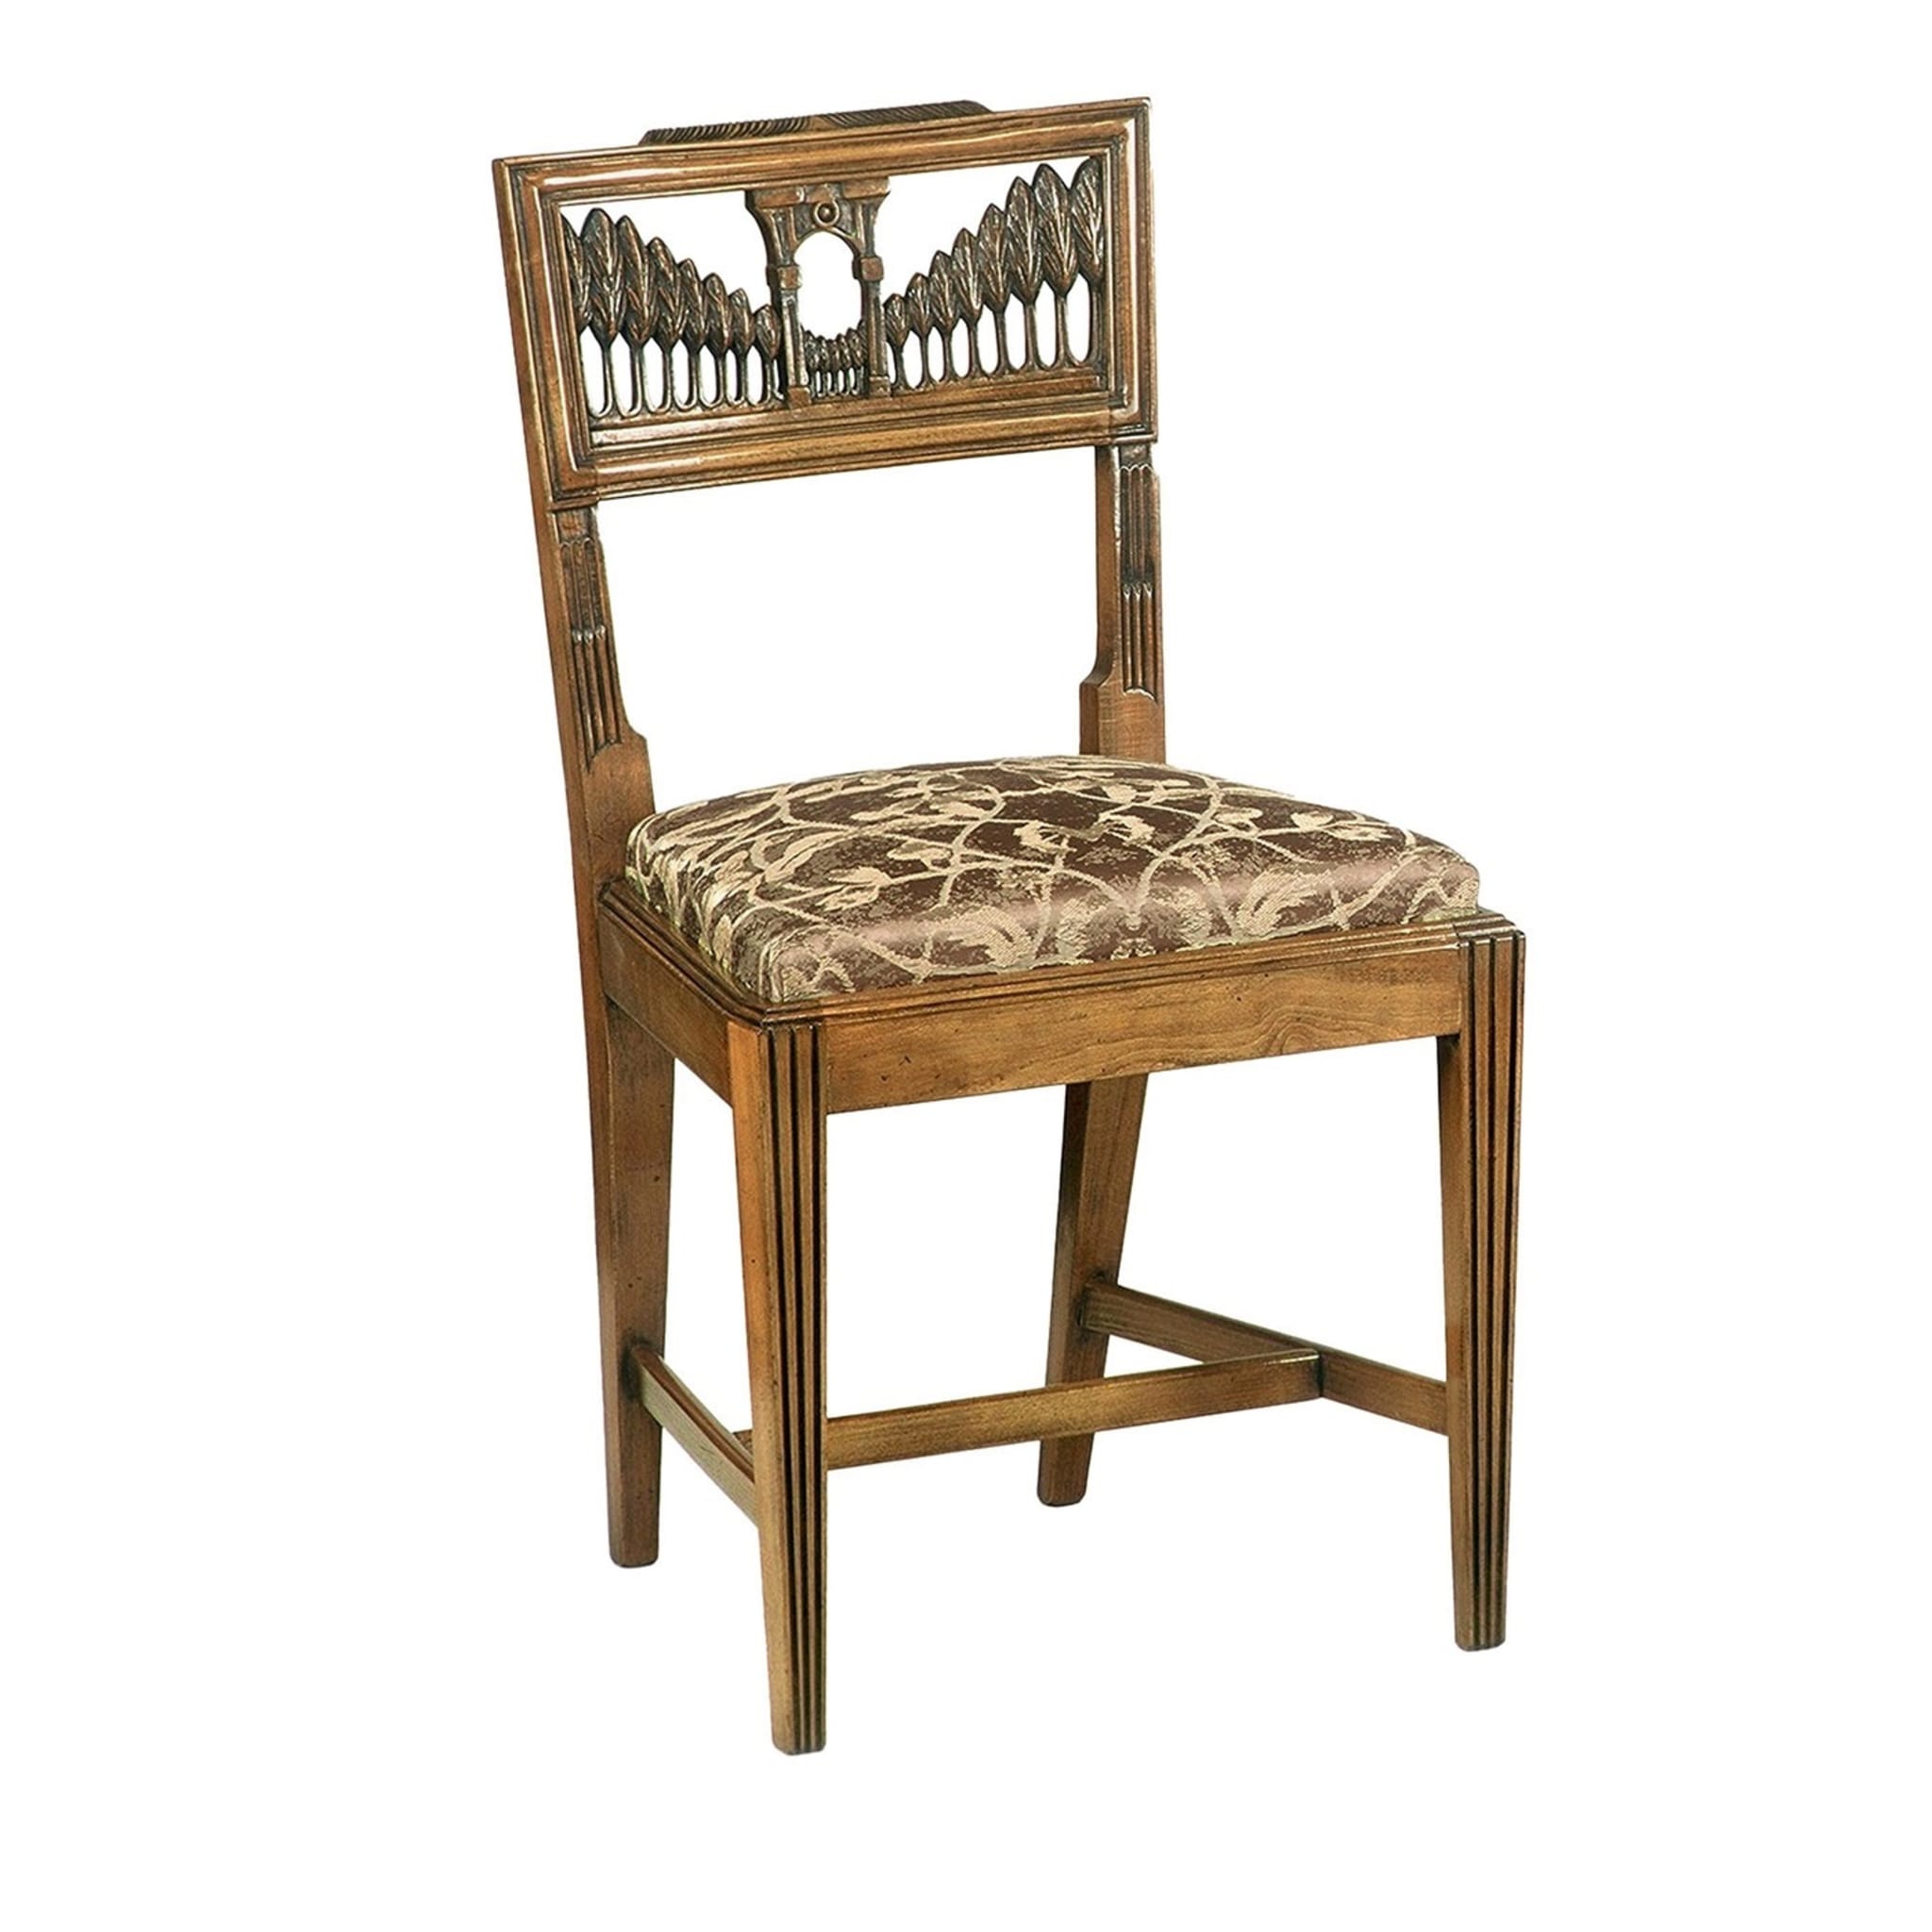  Viale Dei Trionfi French Empire-Style Chair - Main view